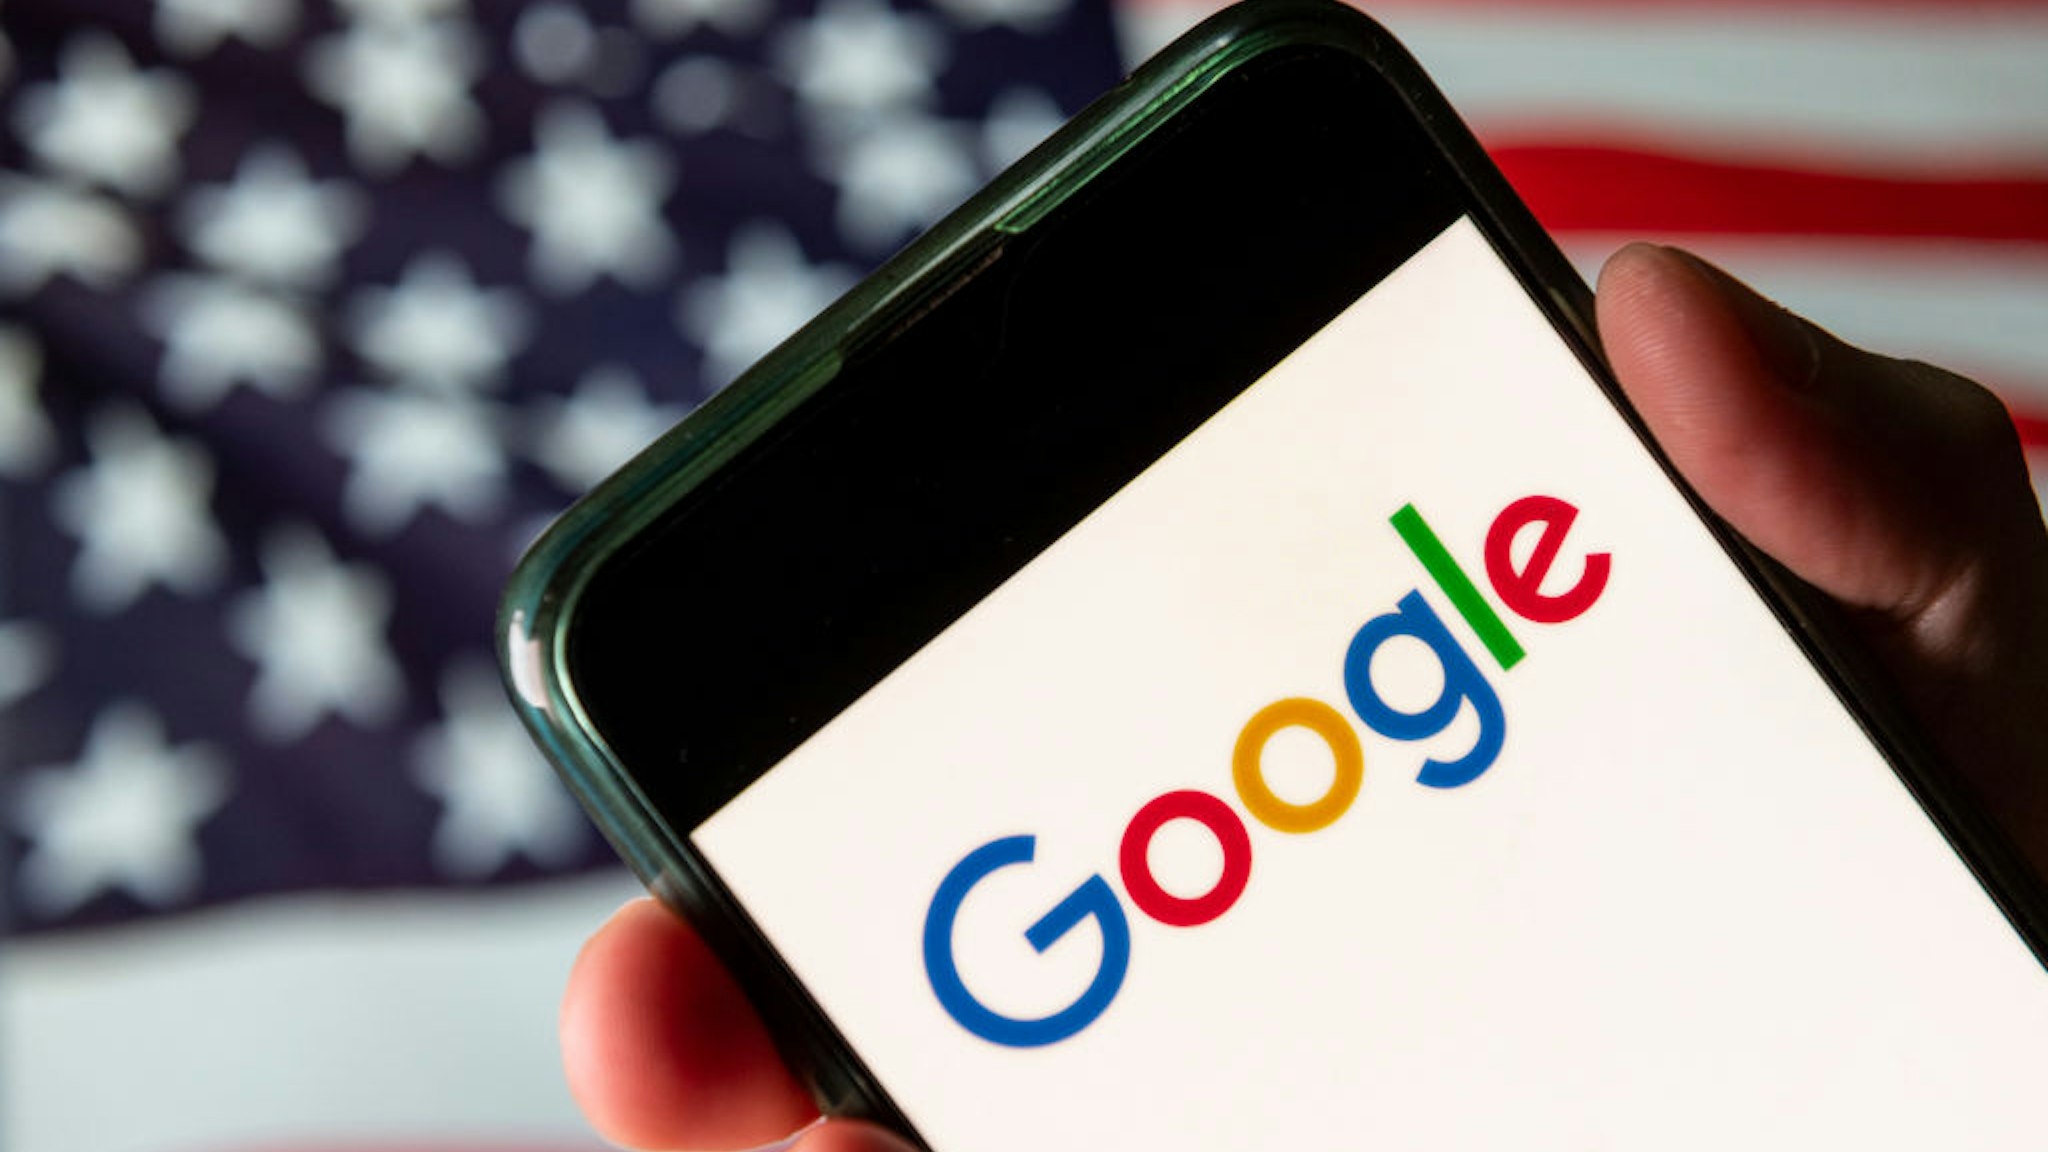 CHINA - 2020/08/13: In this photo illustration the American multinational technology company and search engine Google logo is seen on an Android mobile device with United States of America flag in the background. (Photo Illustration by Budrul Chukrut/SOPA Images/LightRocket via Getty Images)